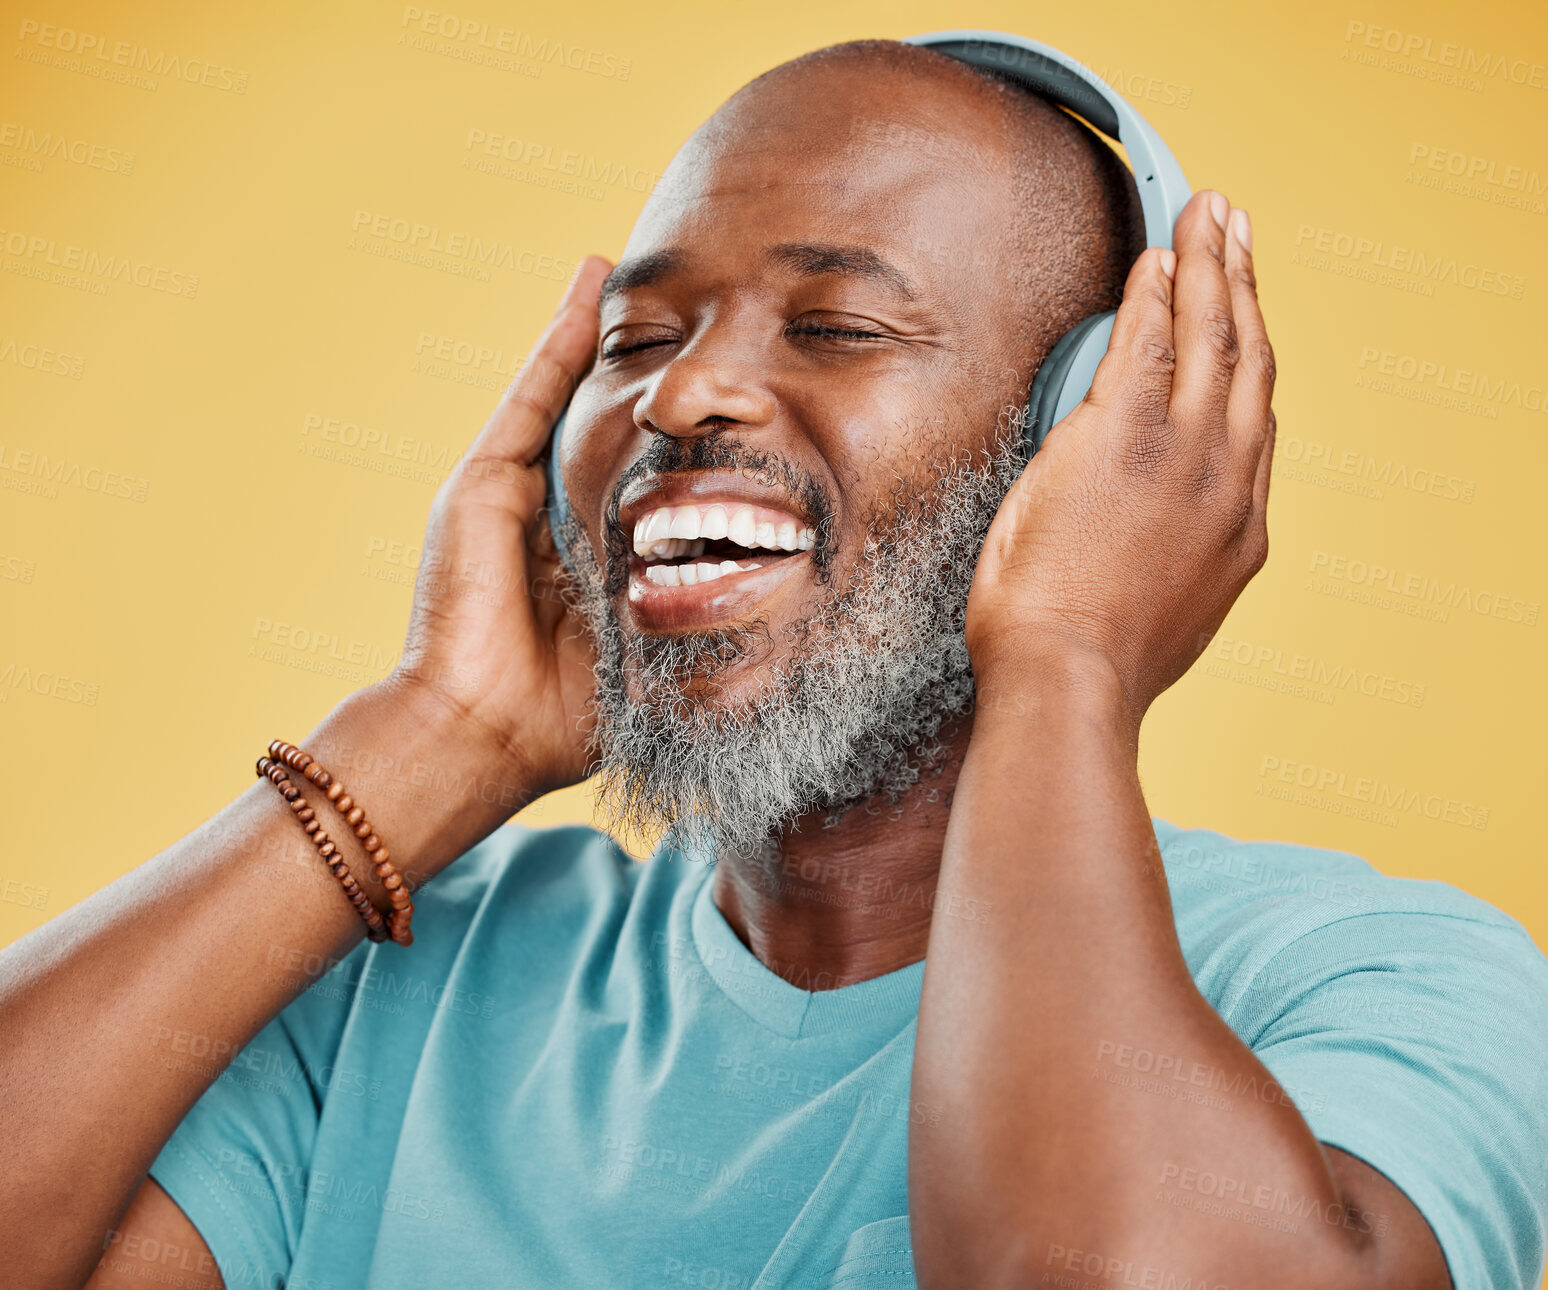 Buy stock photo One mature african american man listening to music using wireless headphones. Happy man with a grey beard smiling while enjoying music. Eyes closed, getting lost in the music and feeling carefree